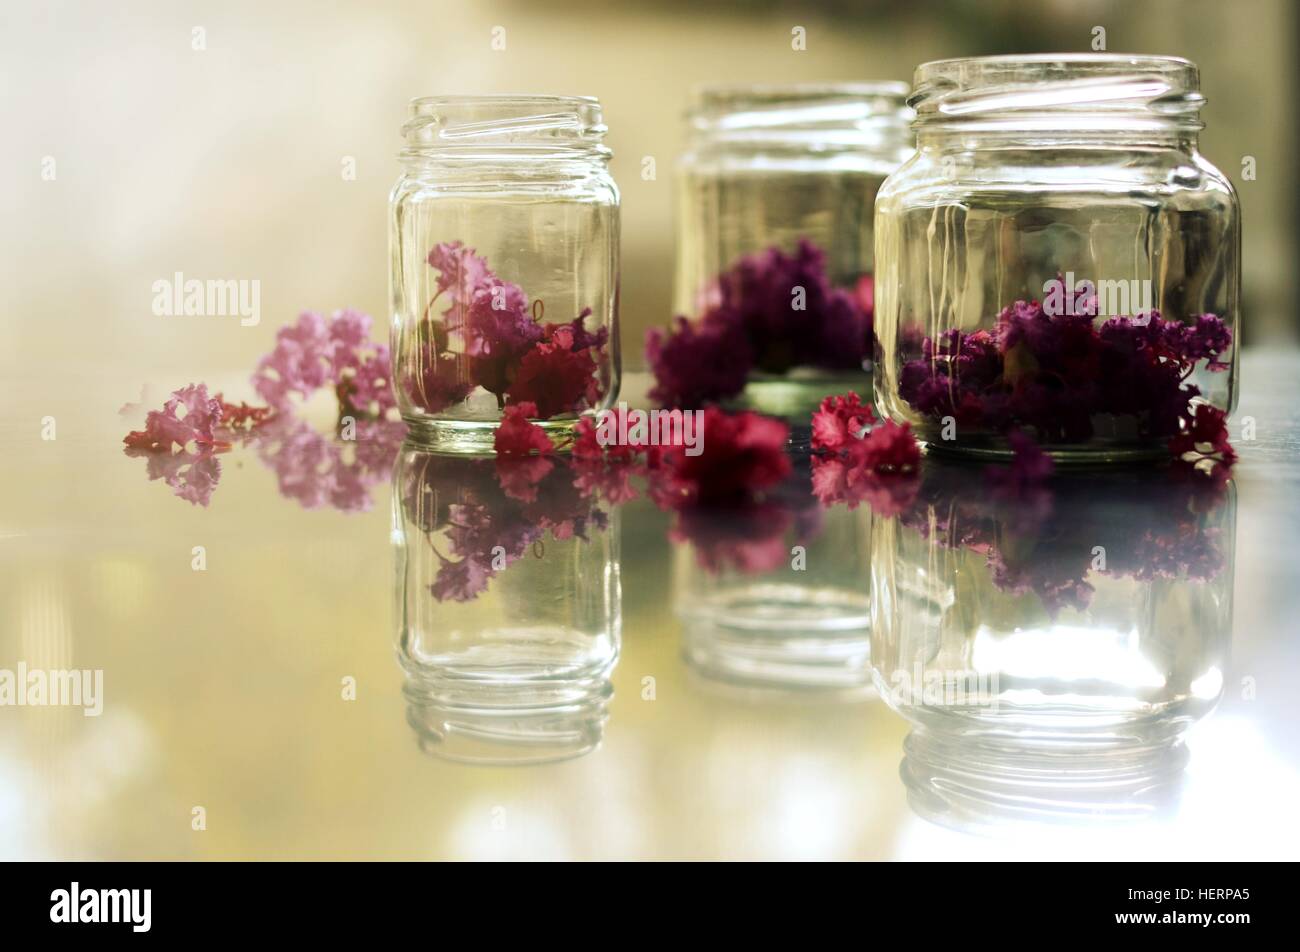 Flowers in glass jars Stock Photo